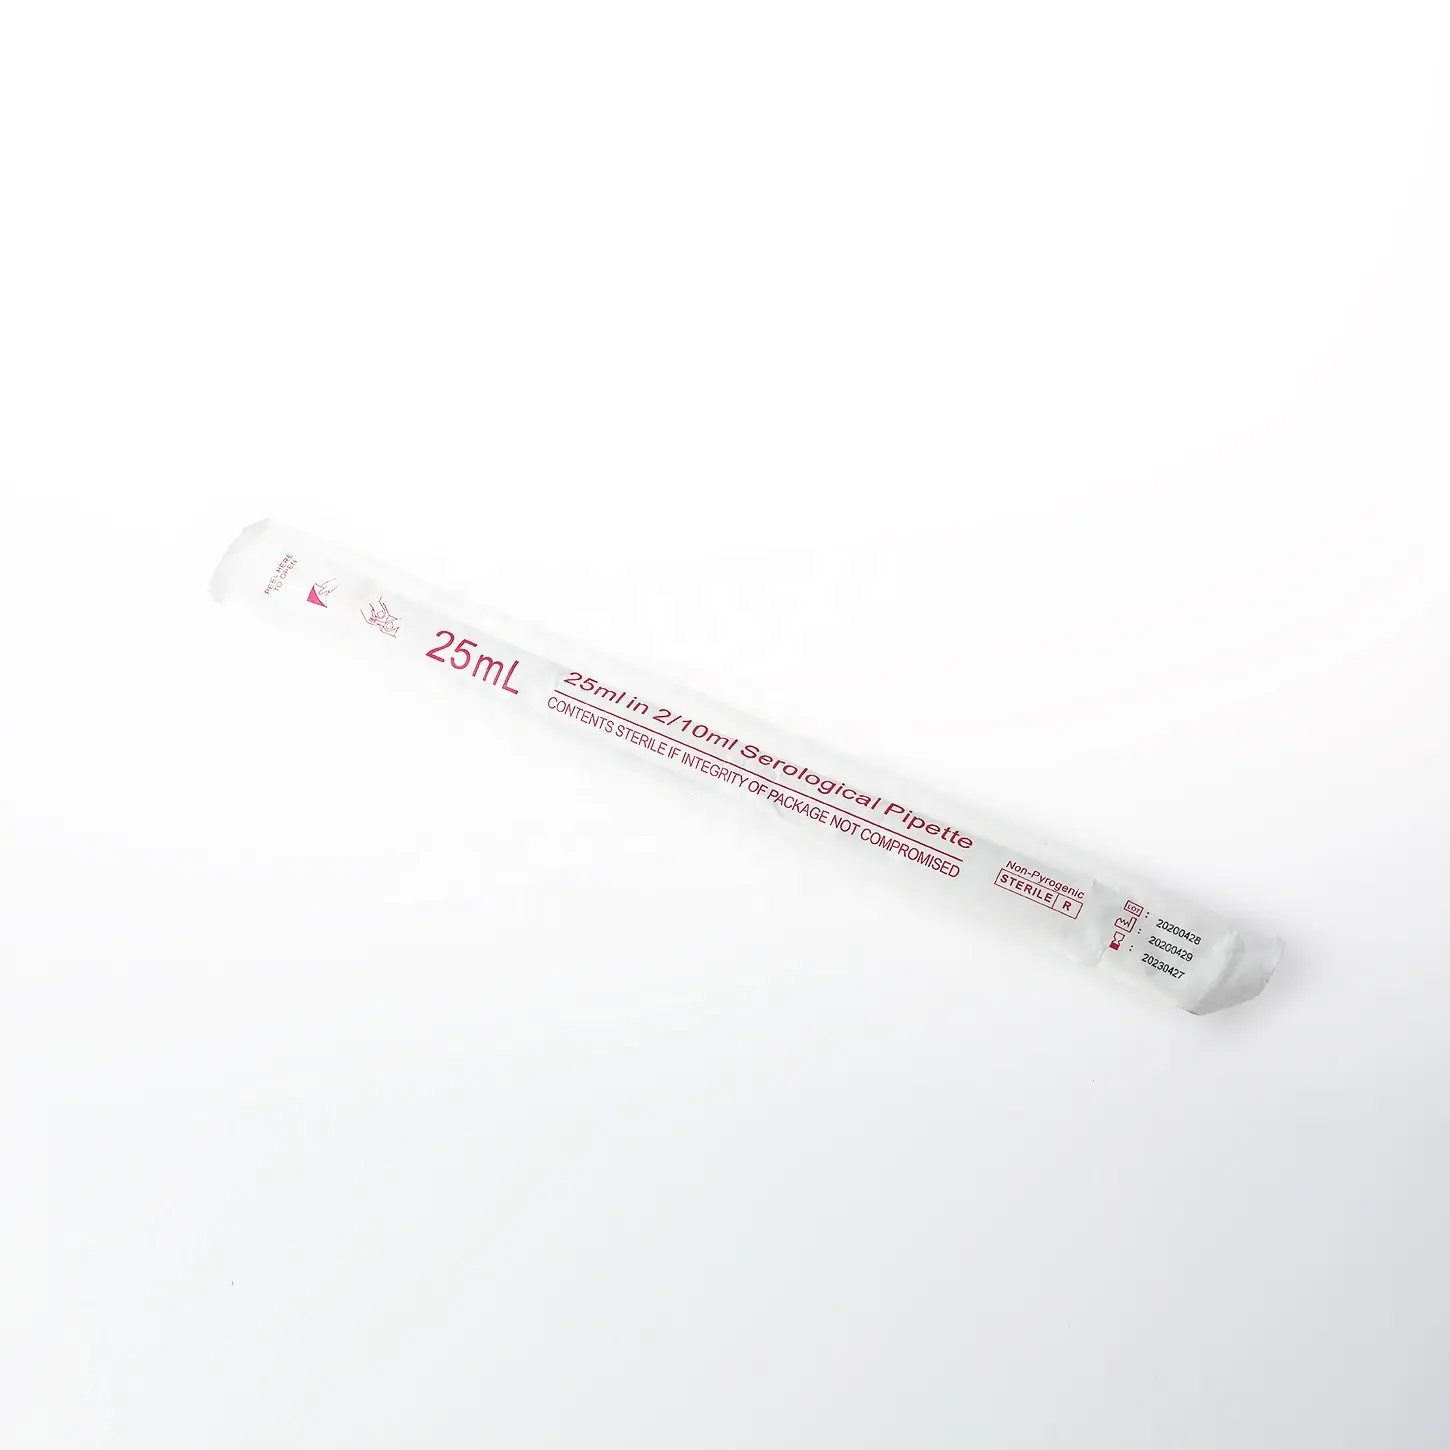 lab equipment Polystyrene 5ml Lab Consumable Disposable aspirating Serological Pipette Sterile Serological Transparent